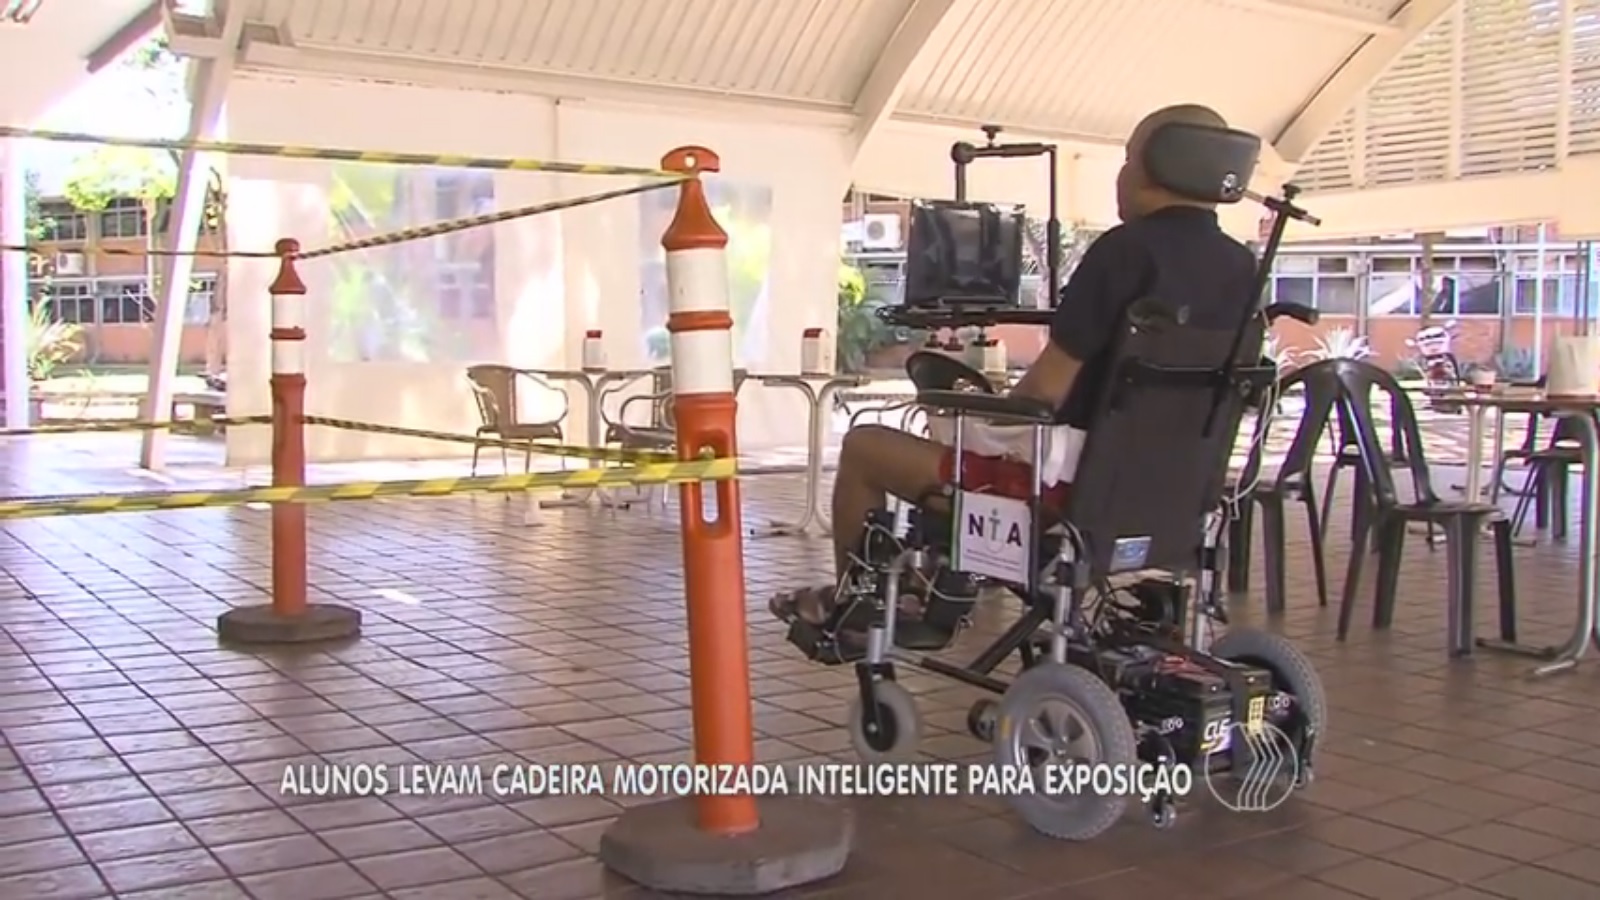 Students take smart wheelchair for exhibition